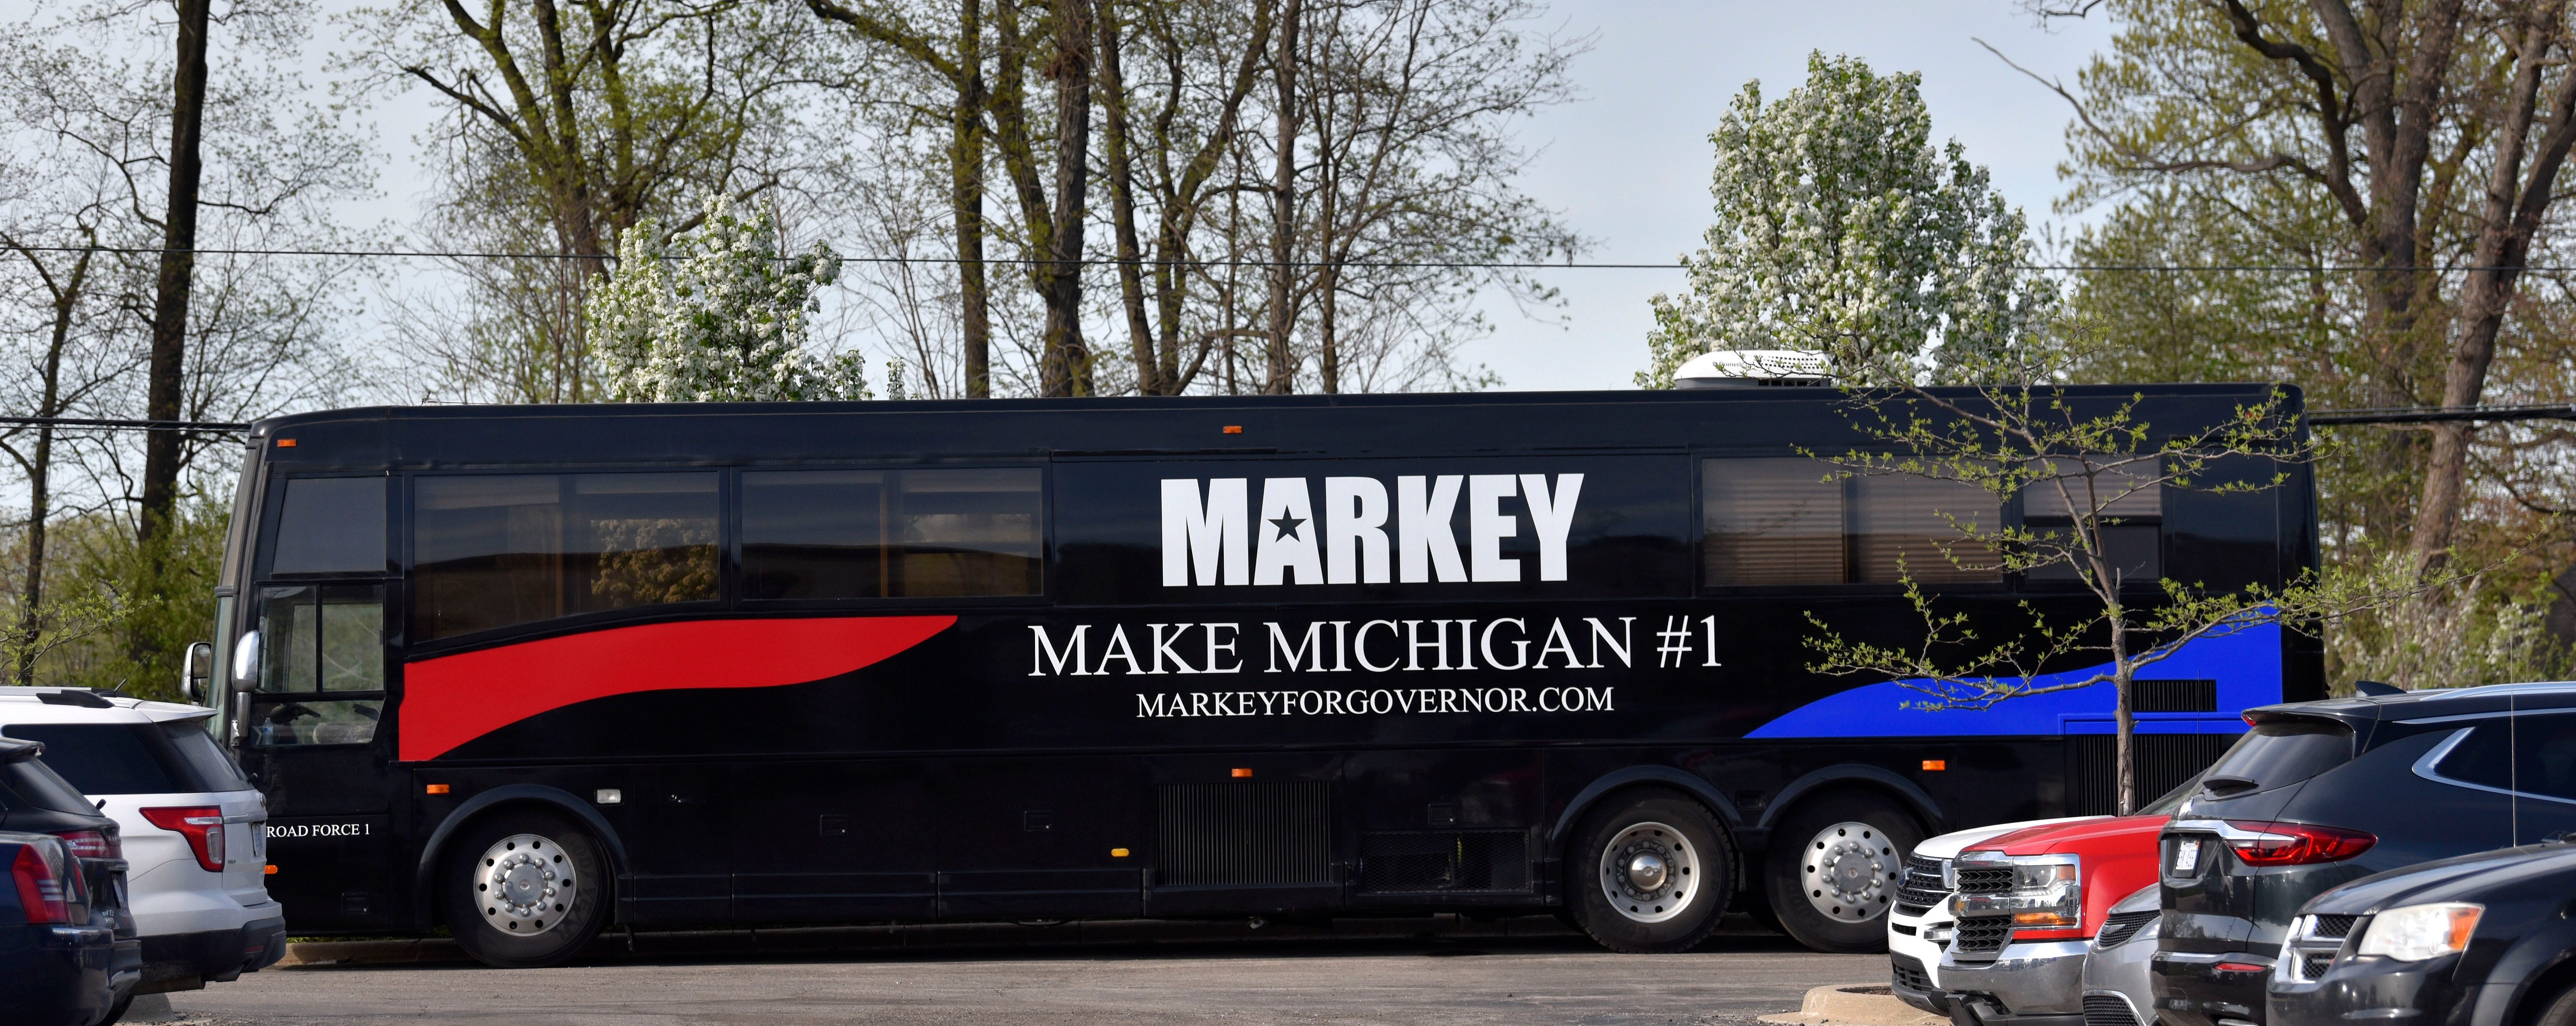 The bus of Candidate Michael Markey, Thursday, May 12, 2022. 
The Livingston County Republican Party's 2022 Lincoln Day Dinner features the First Official GOP Gubernatorial Debate at Crystal Gardens Event and Banquet Center in Howell, Thursday night, May 12, 2022.